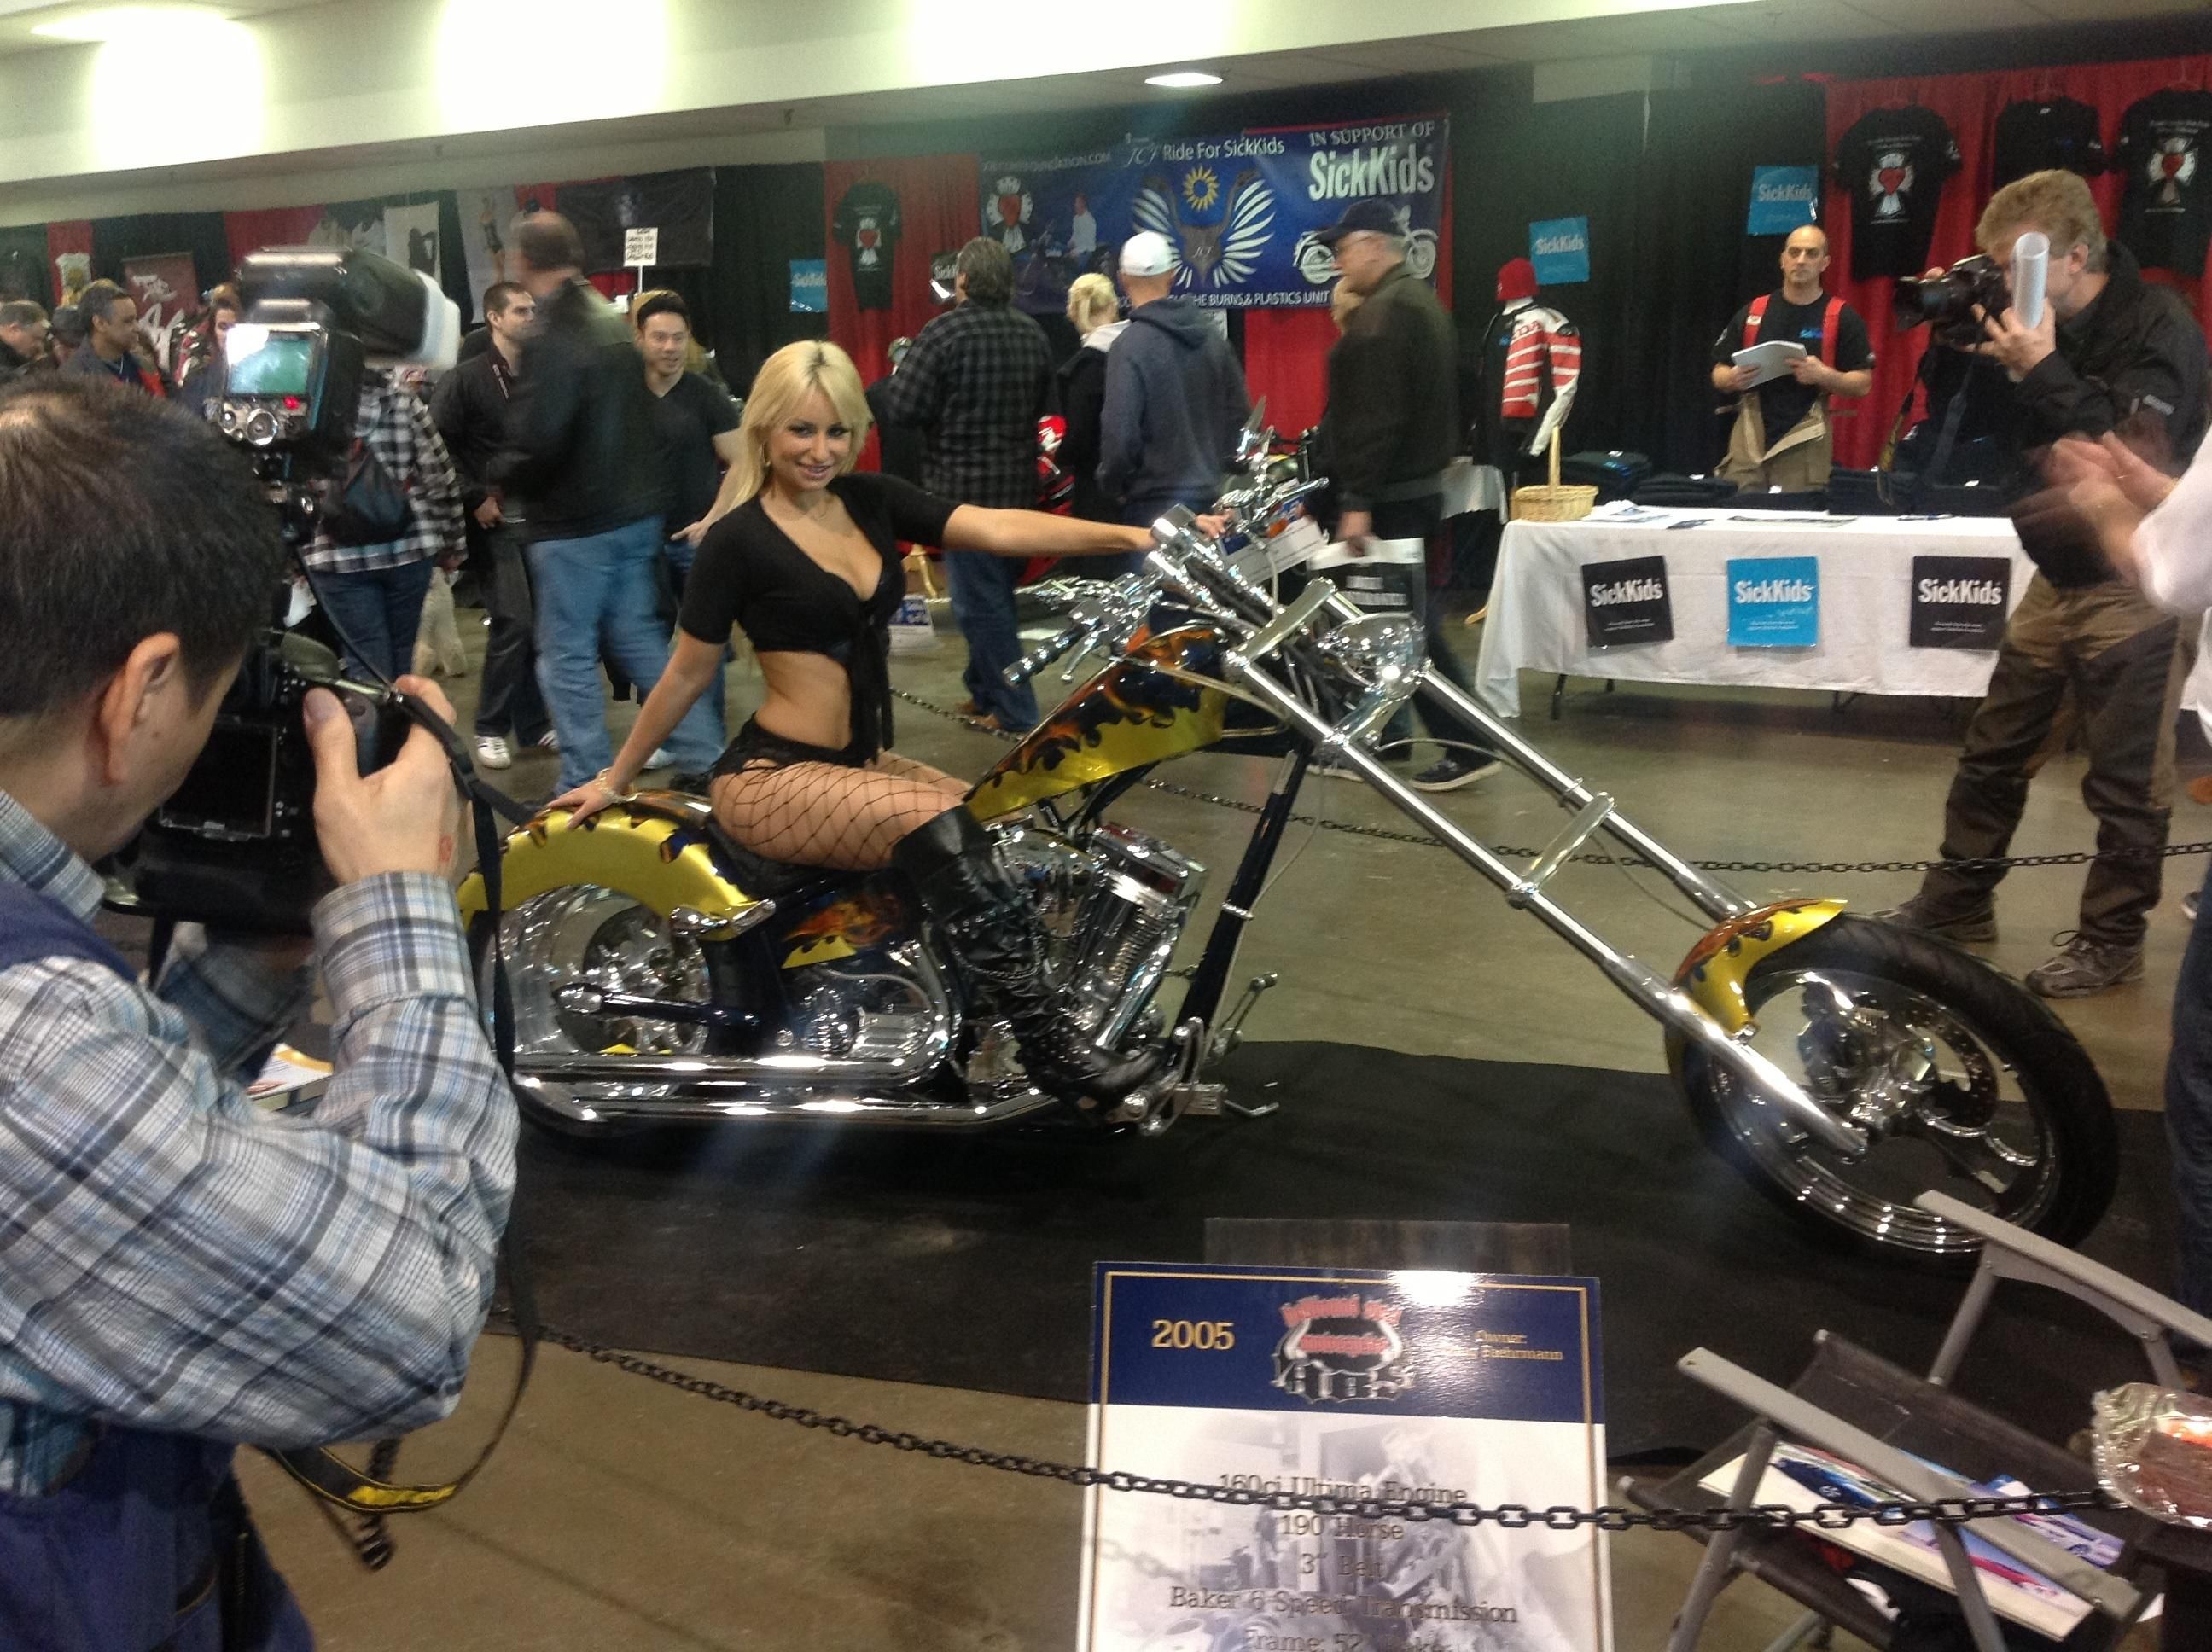 Hot Girls on bikes at the Spring Motorcycle Show